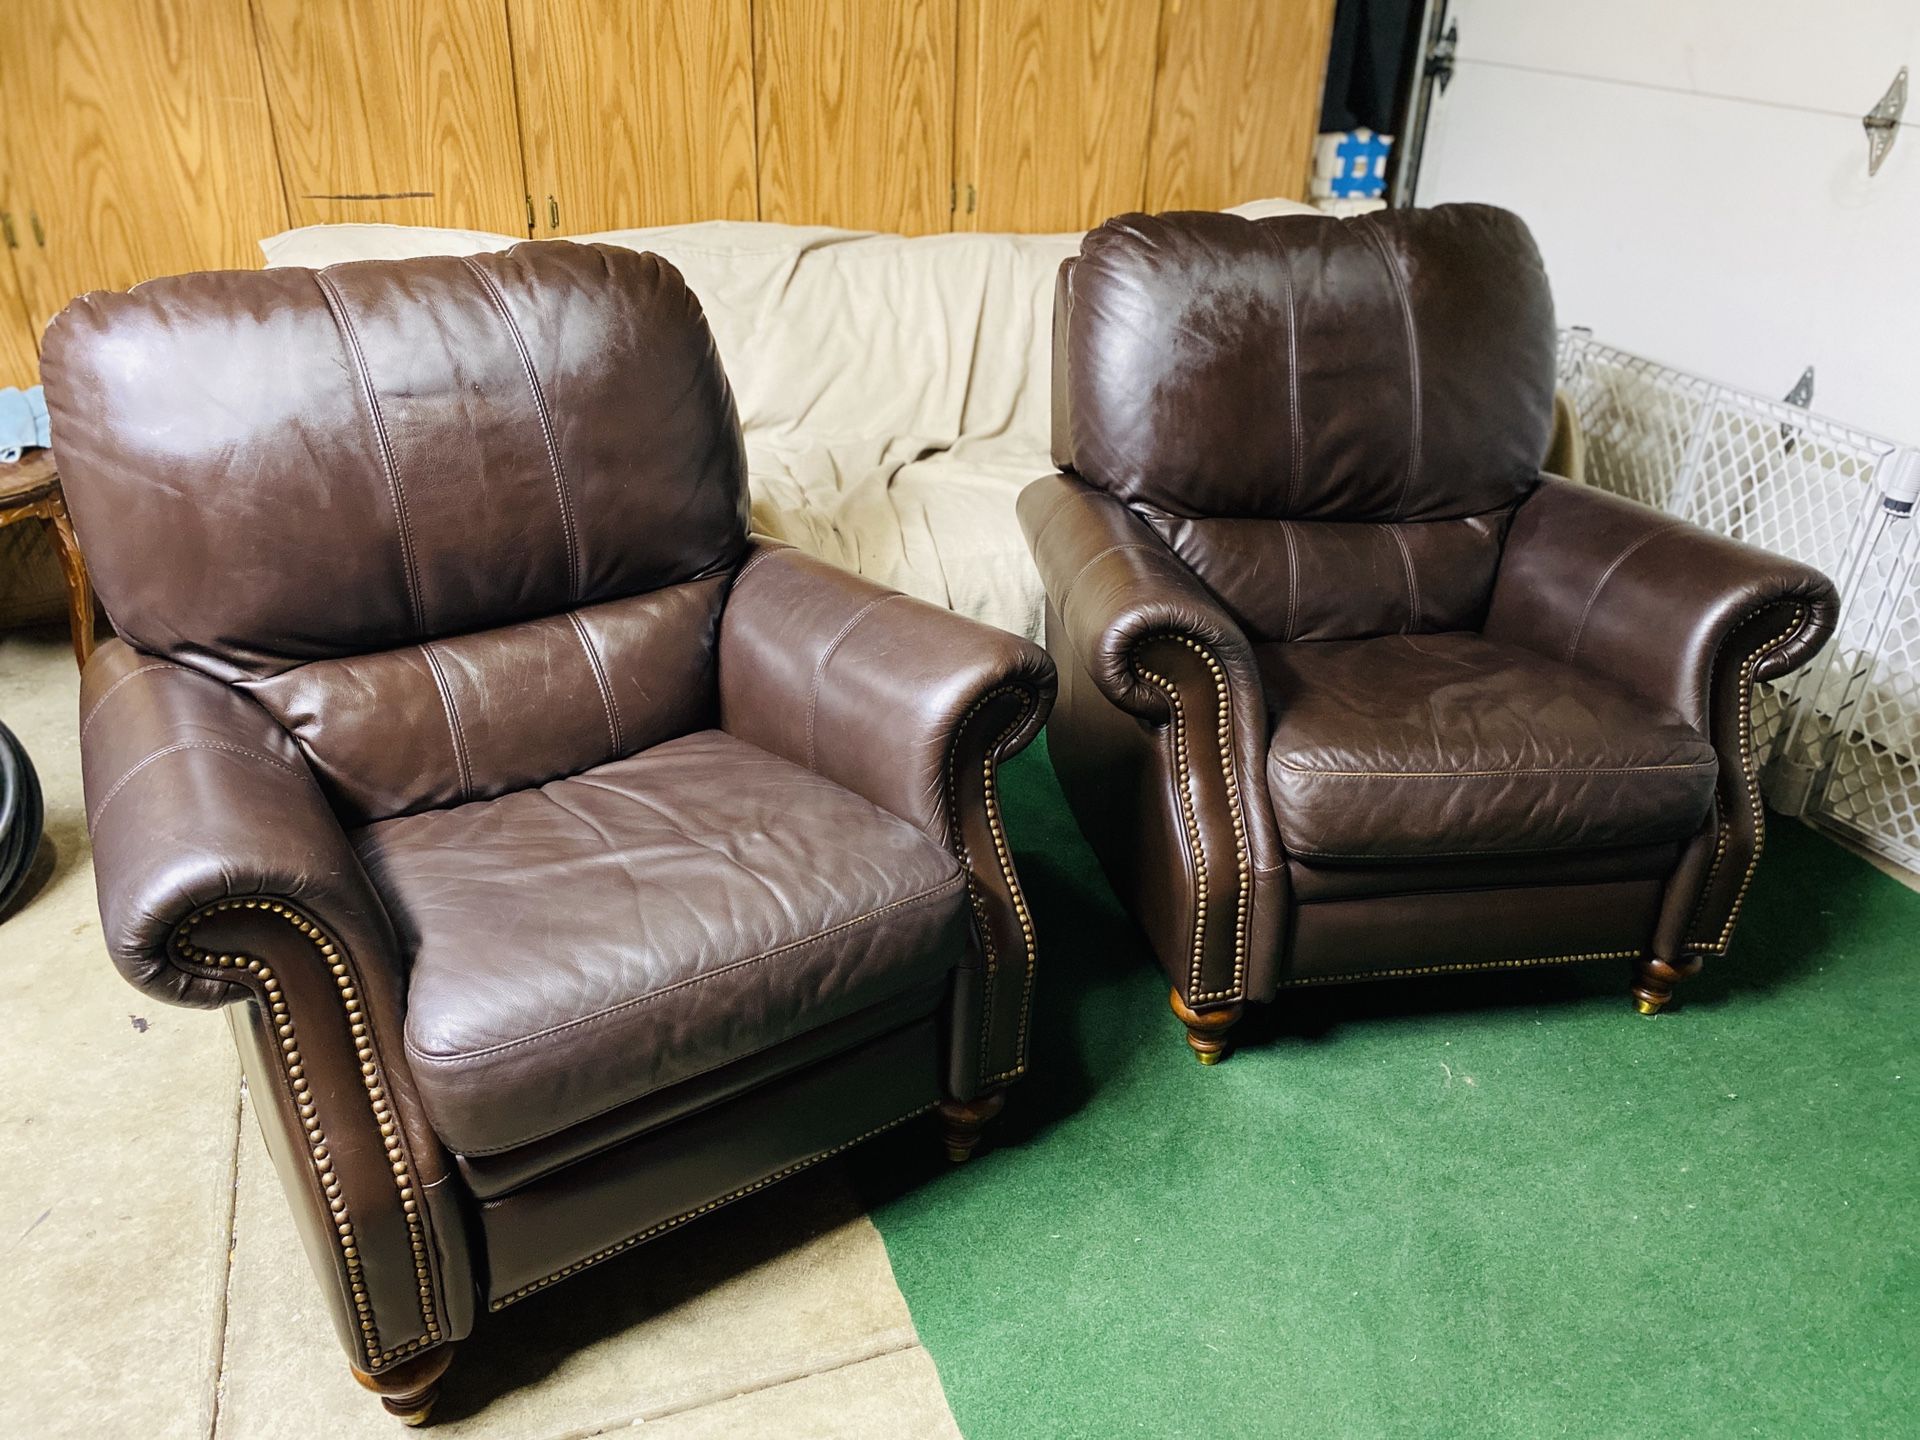 Free Delivery Ethan Allen Leather Recliner Chairs - Very Comfortable